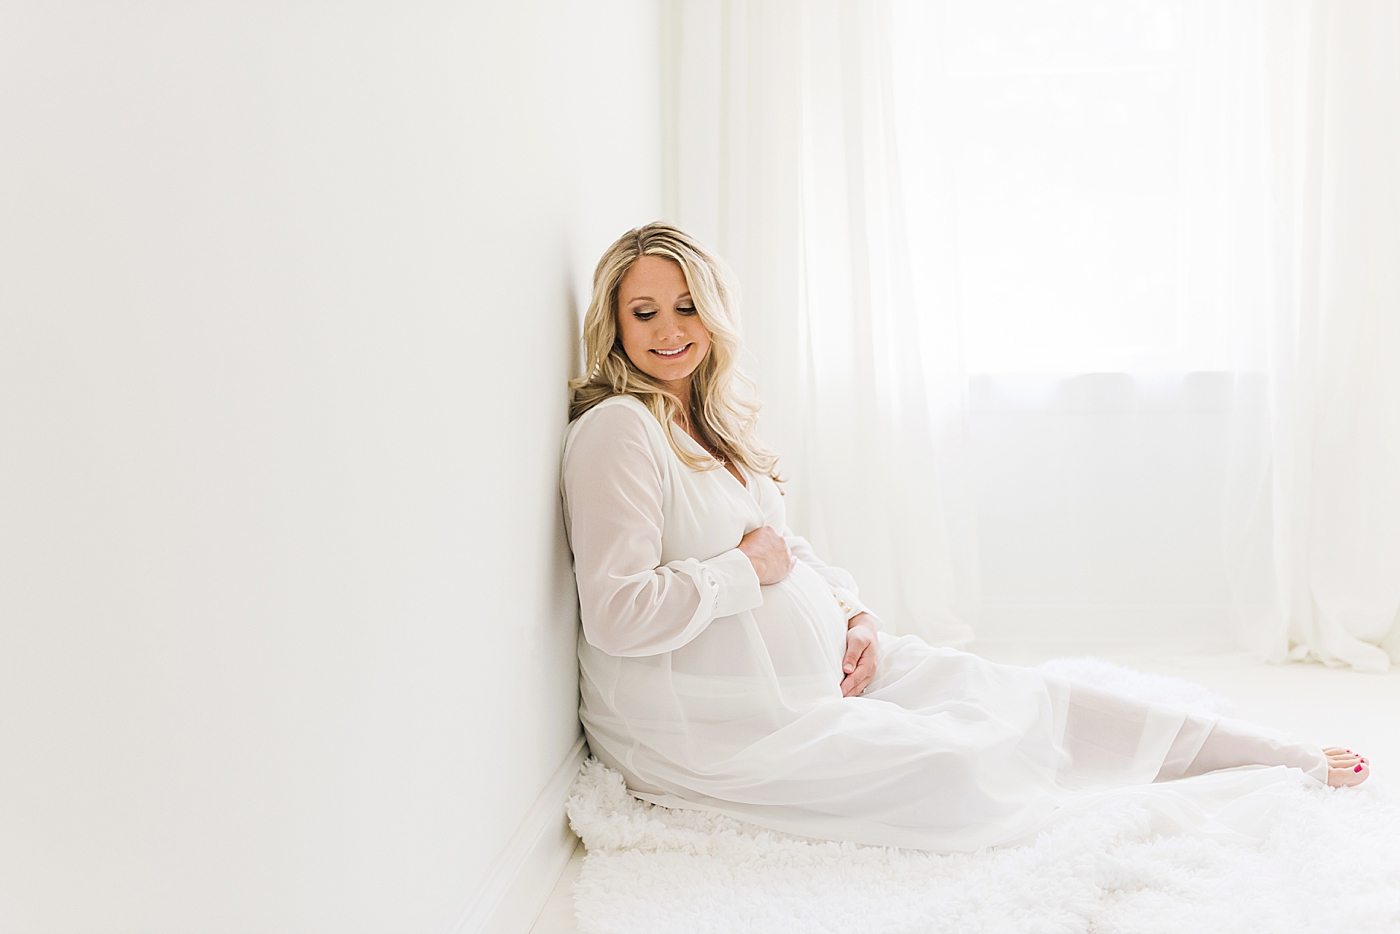 Mother to be in sheer white dress | Photo by Anna Wisjo Photography